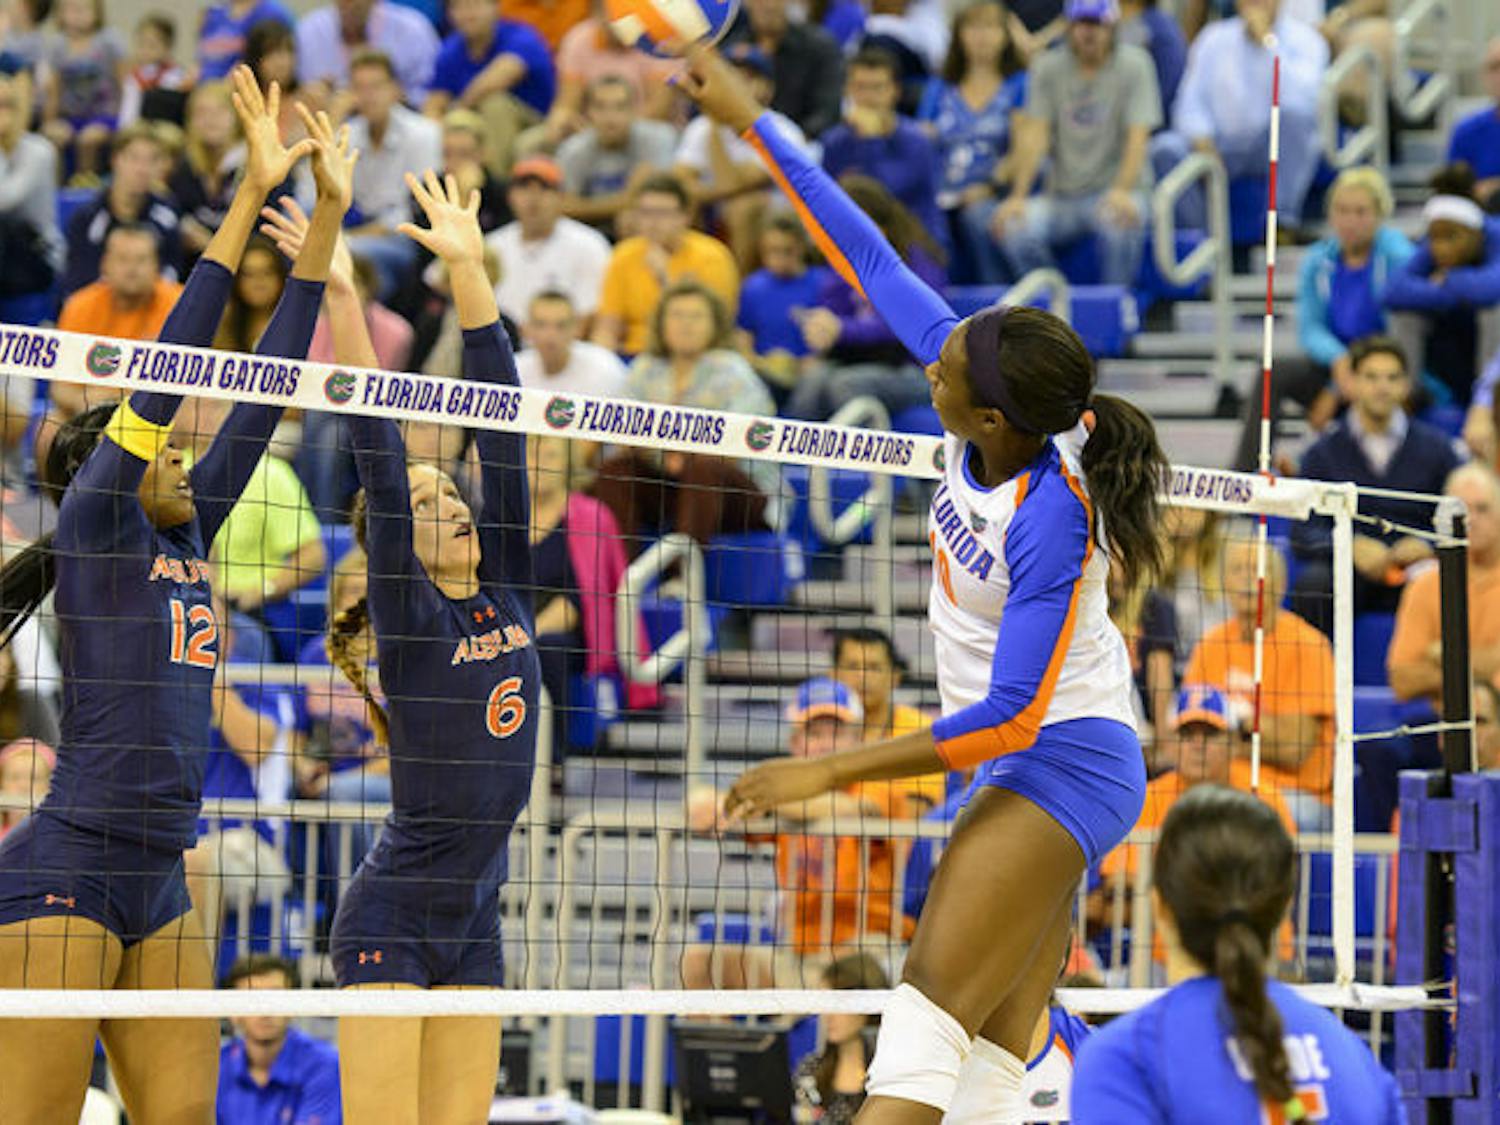 Redshirt senior middle blocker Chloe Mann spikes the ball over the net in Florida’s 3-0 win against Auburn on Oct. 25 in the O’Connell Center.